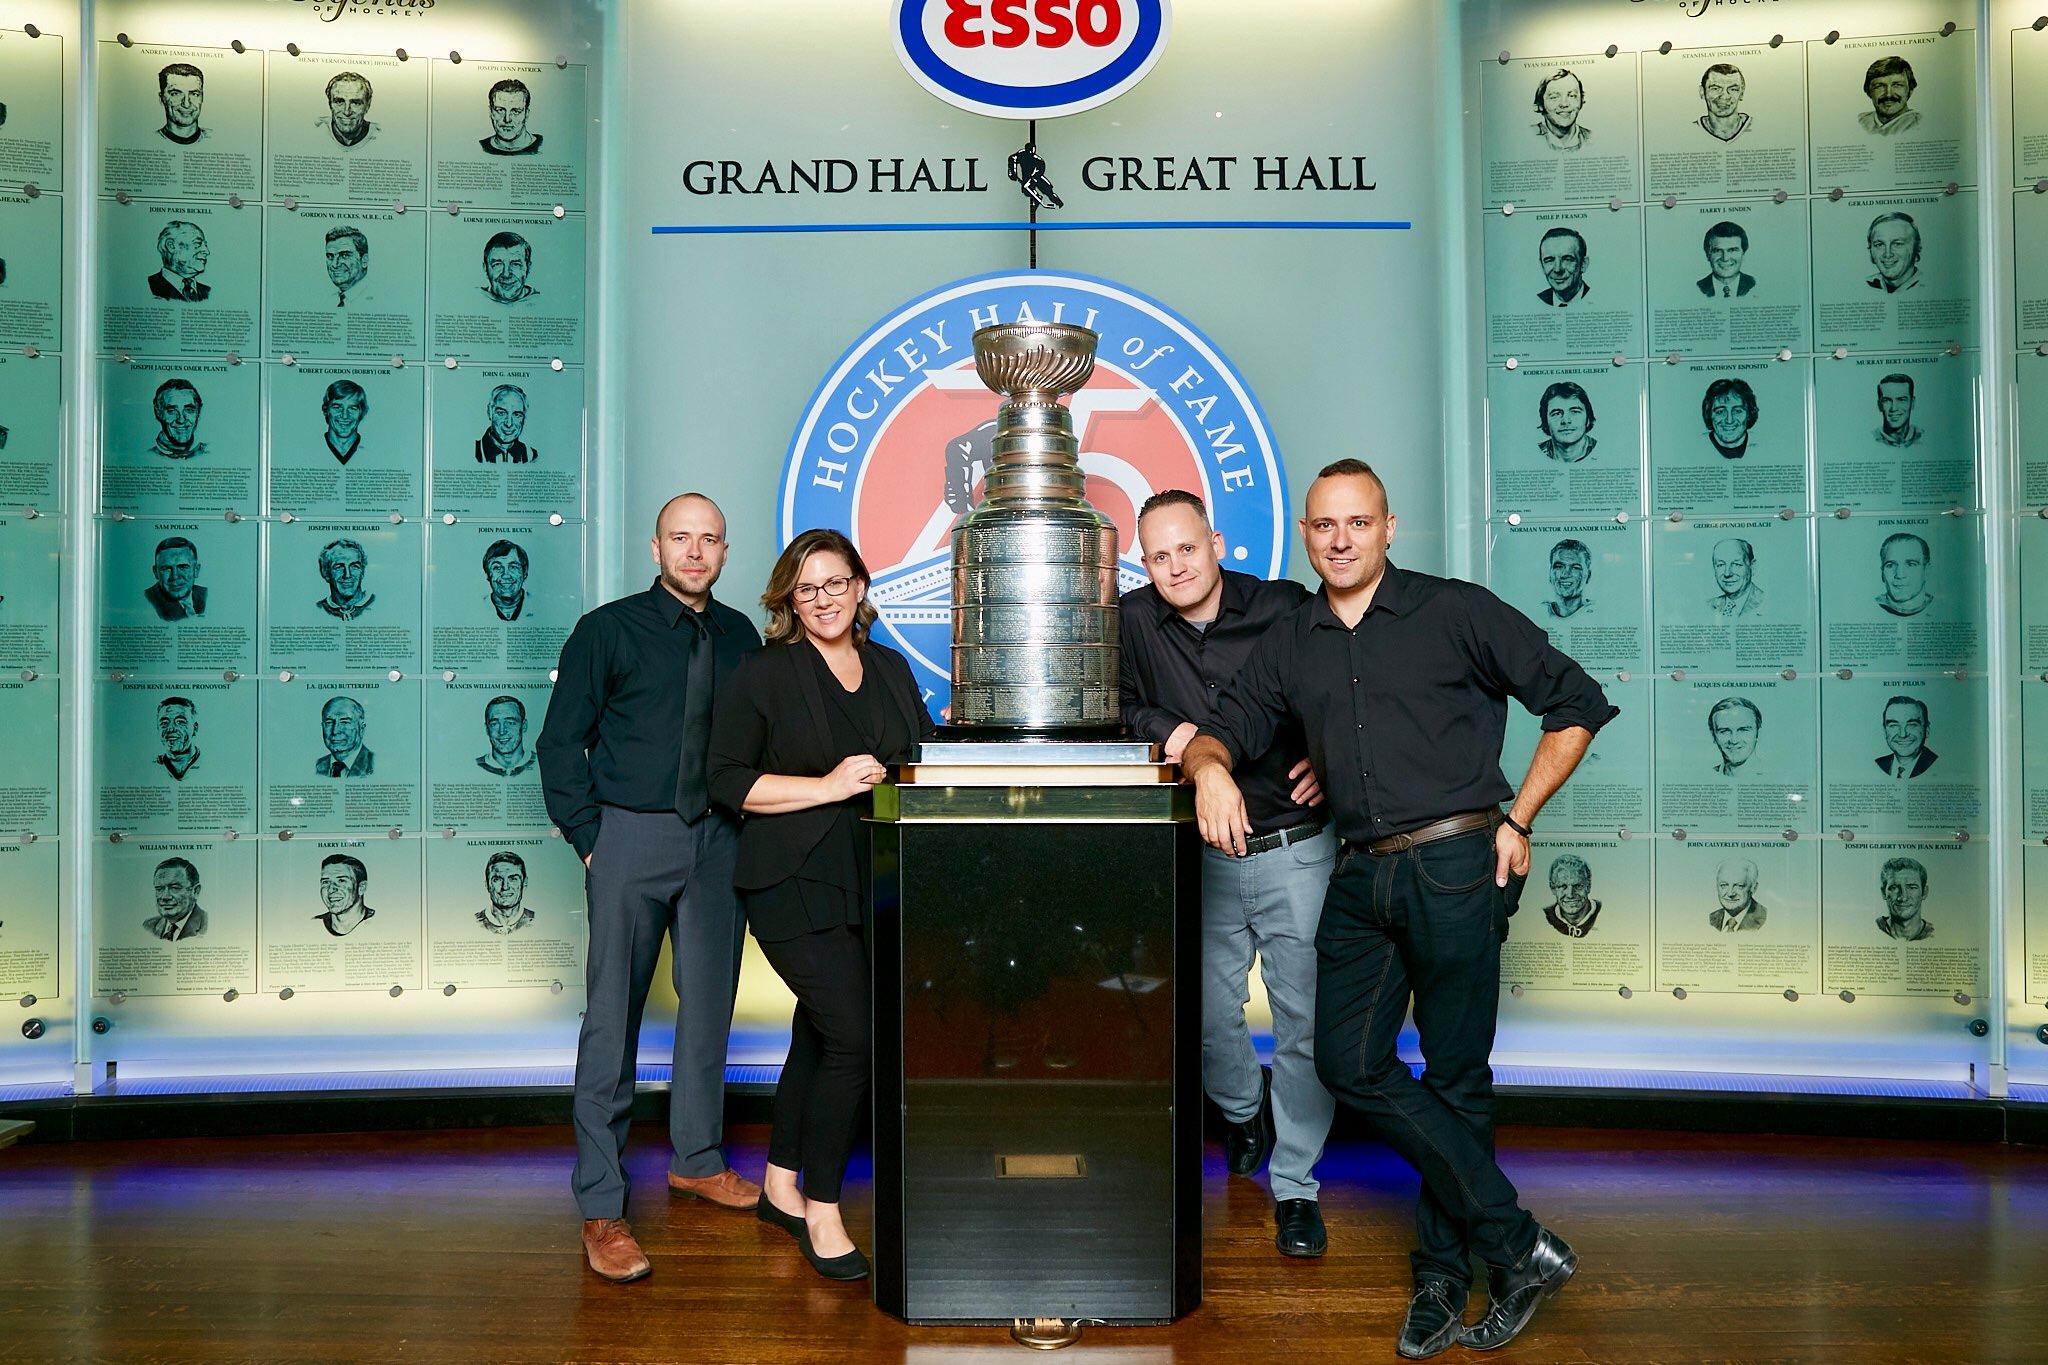 Hockey Hall of Fame Photo Booth